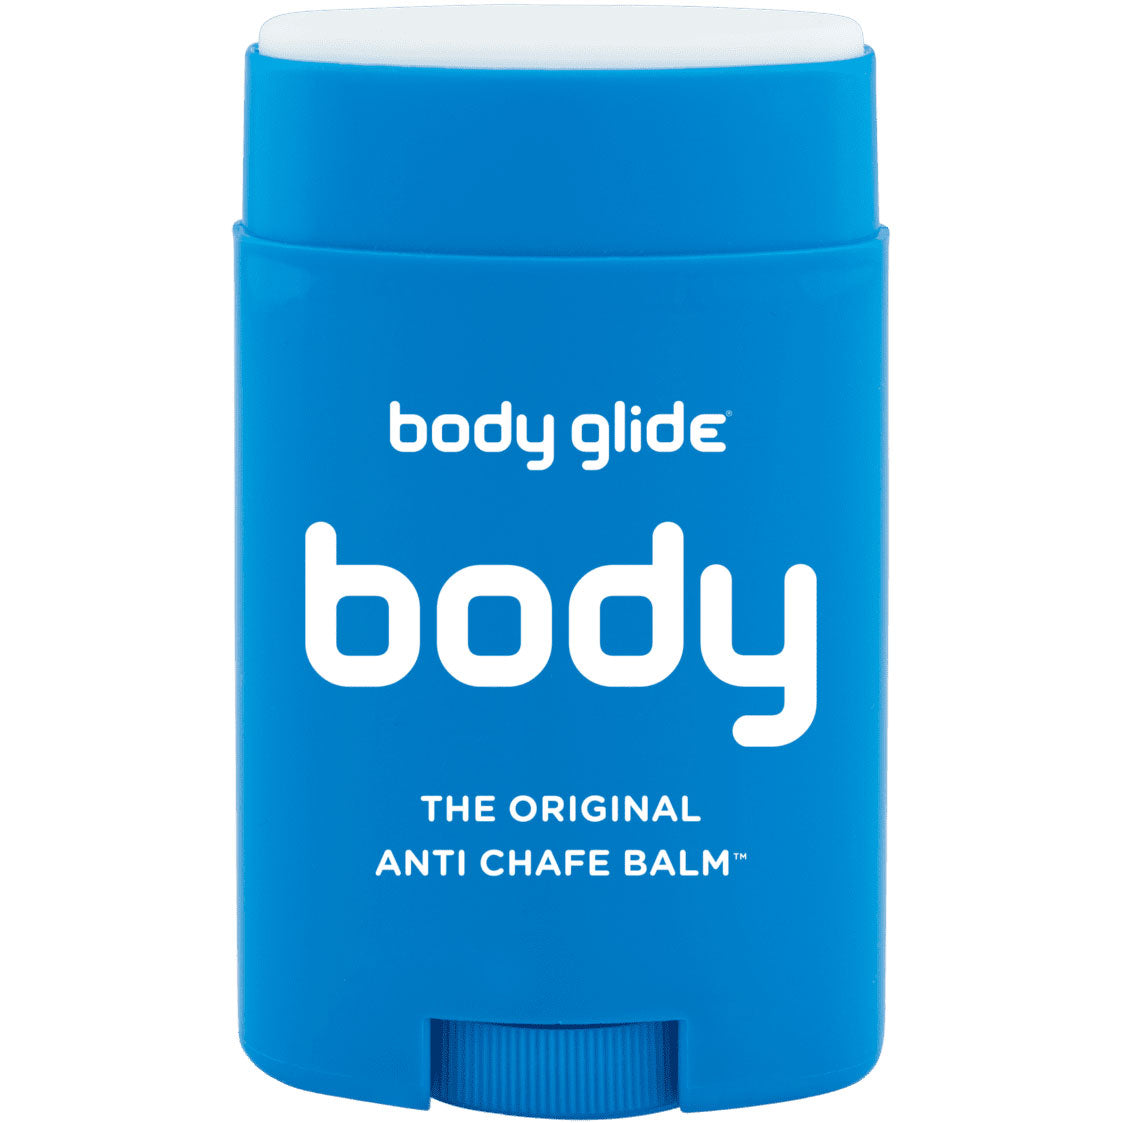 Essential Skincare Tips to Prevent Chafing for Swimmers